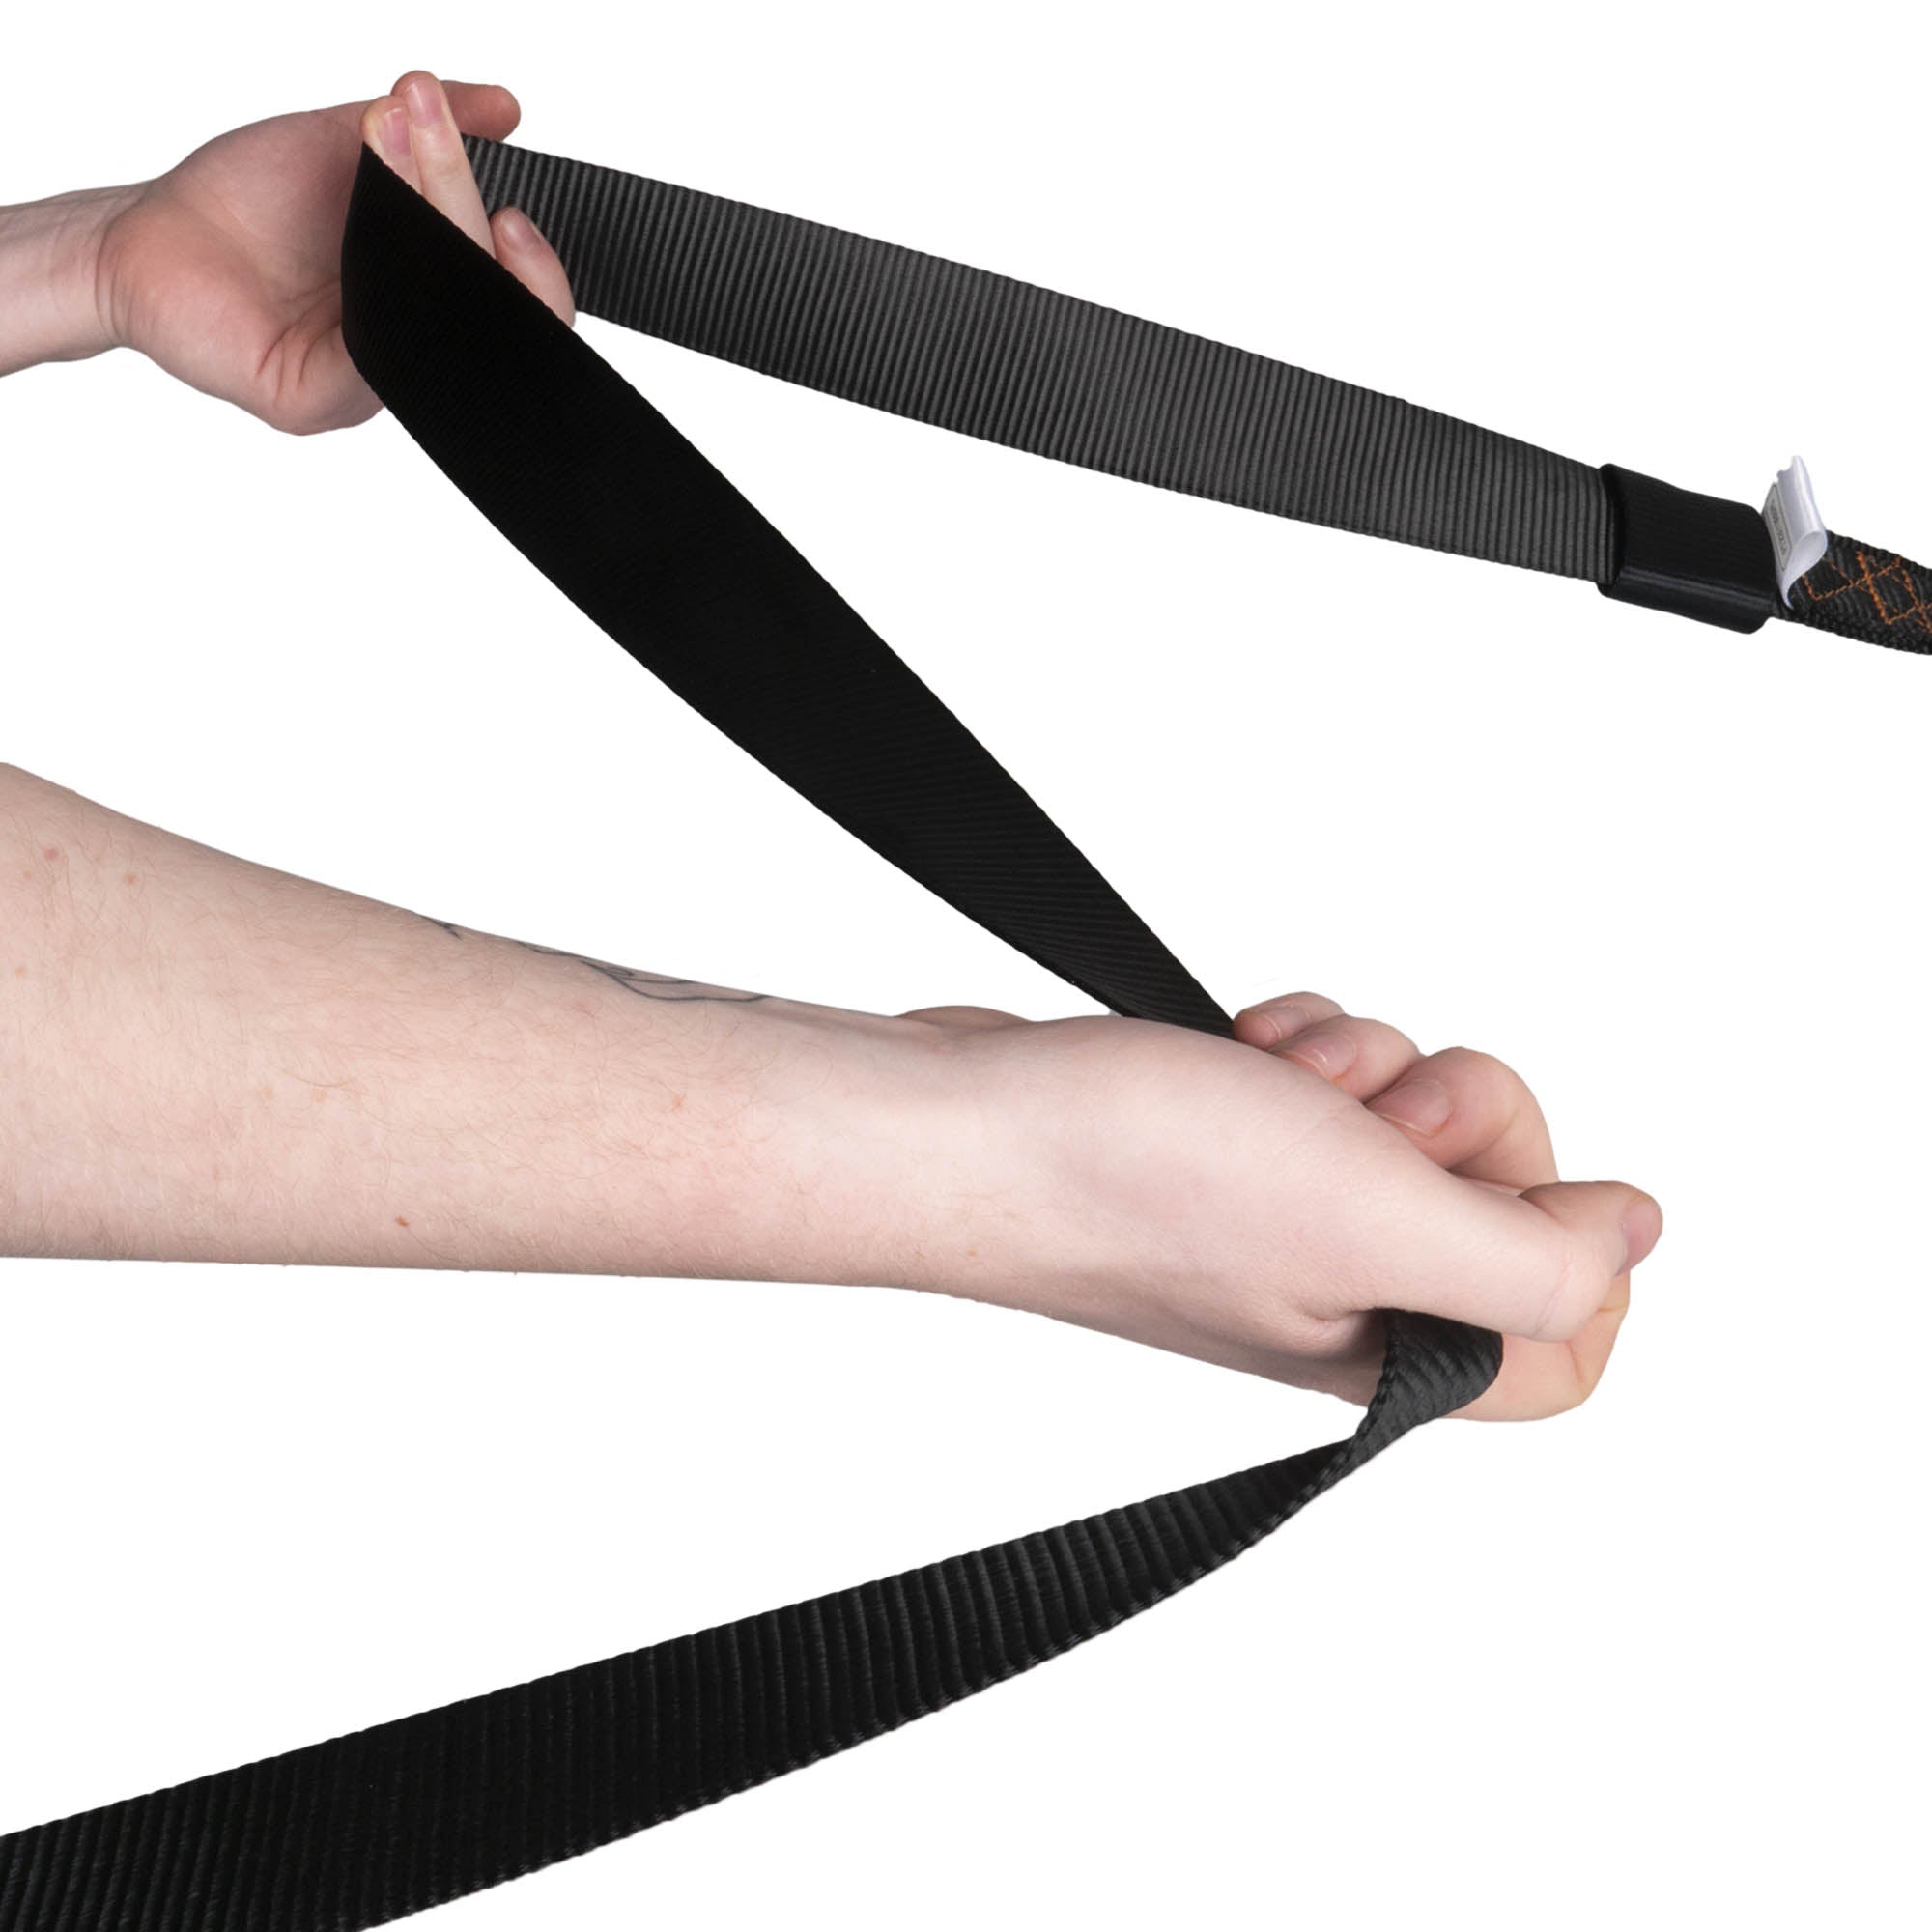 Firetoys long aerial strap in hand